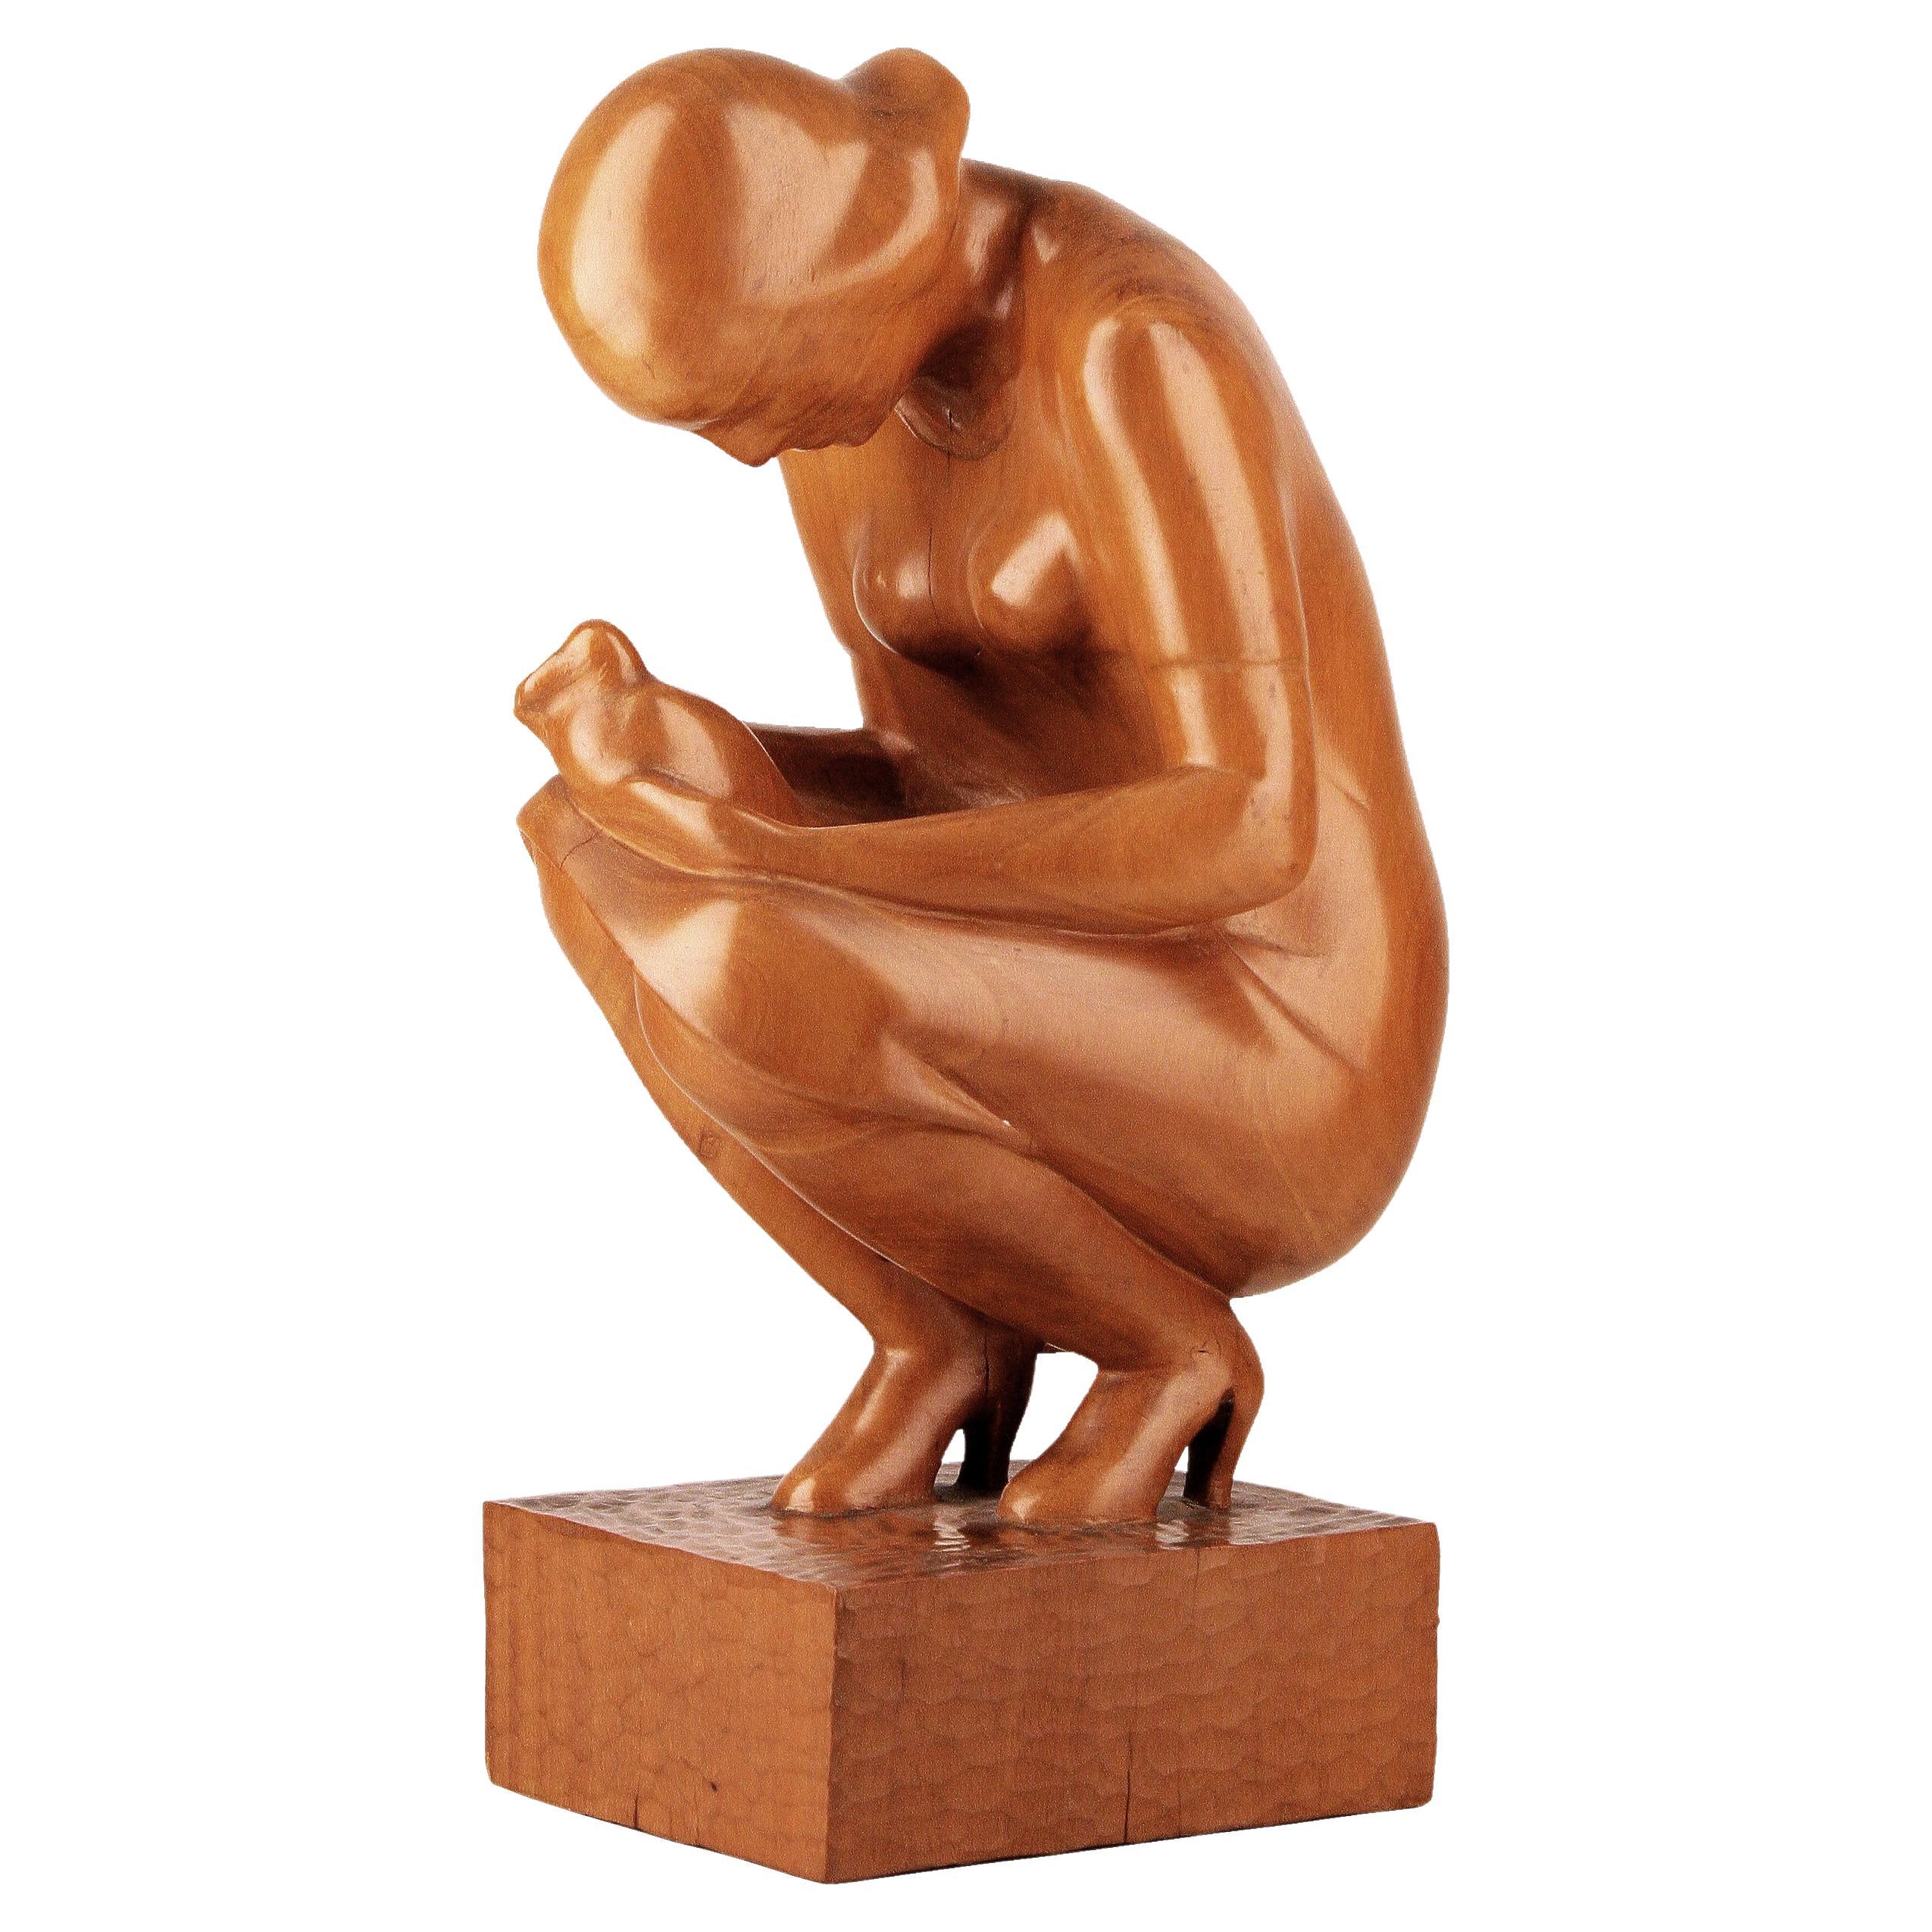 Mid-20th Century Varnished Wood Sculpture of Crouched Lady by Godofredo Paino For Sale